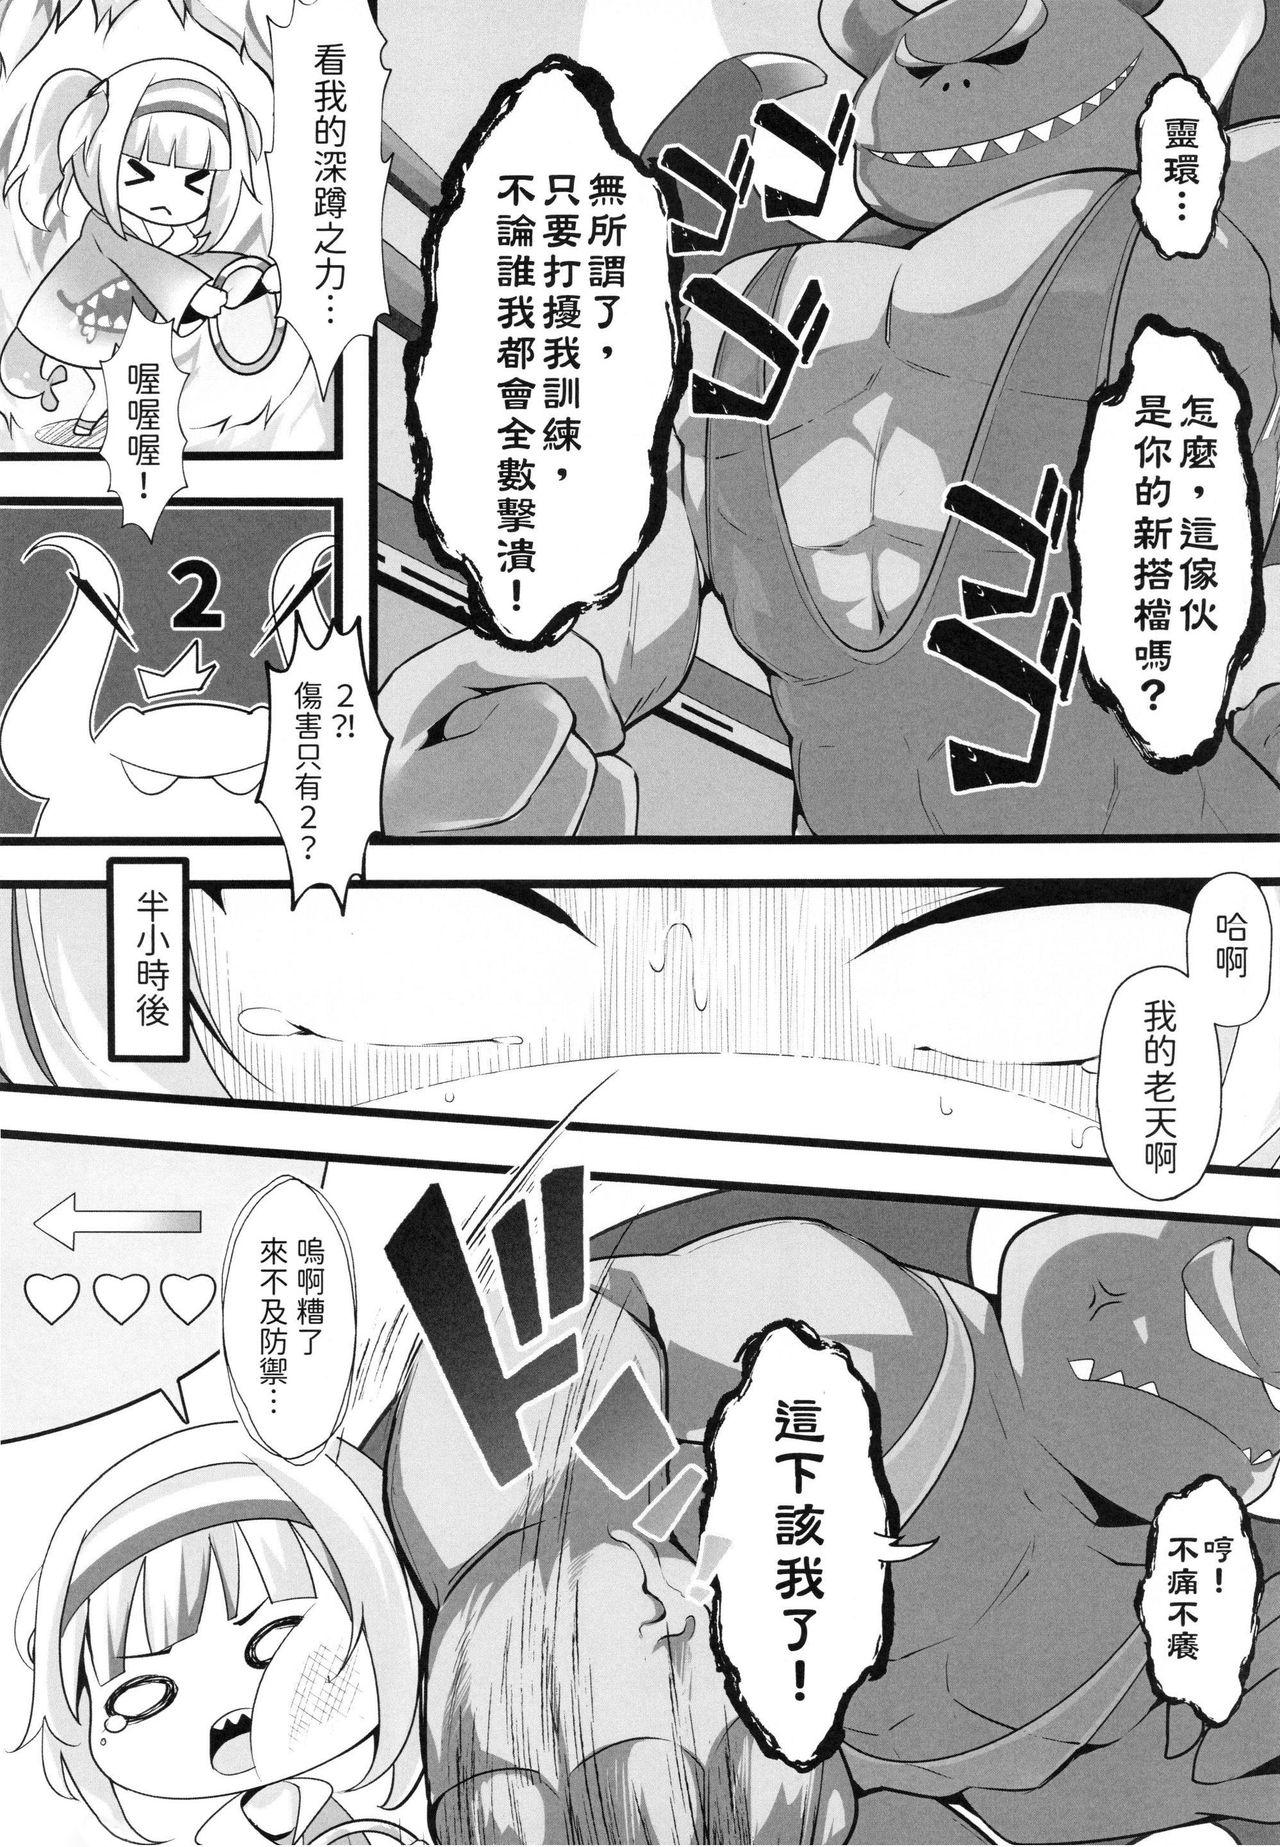 Buttplug 【台灣FF37】[ちやみ] Let's Sweat (hololive) (Gawr Gura) (Vtuber) [Chinese] [Decensored] - Hololive Ring fit adventure Wives - Page 5